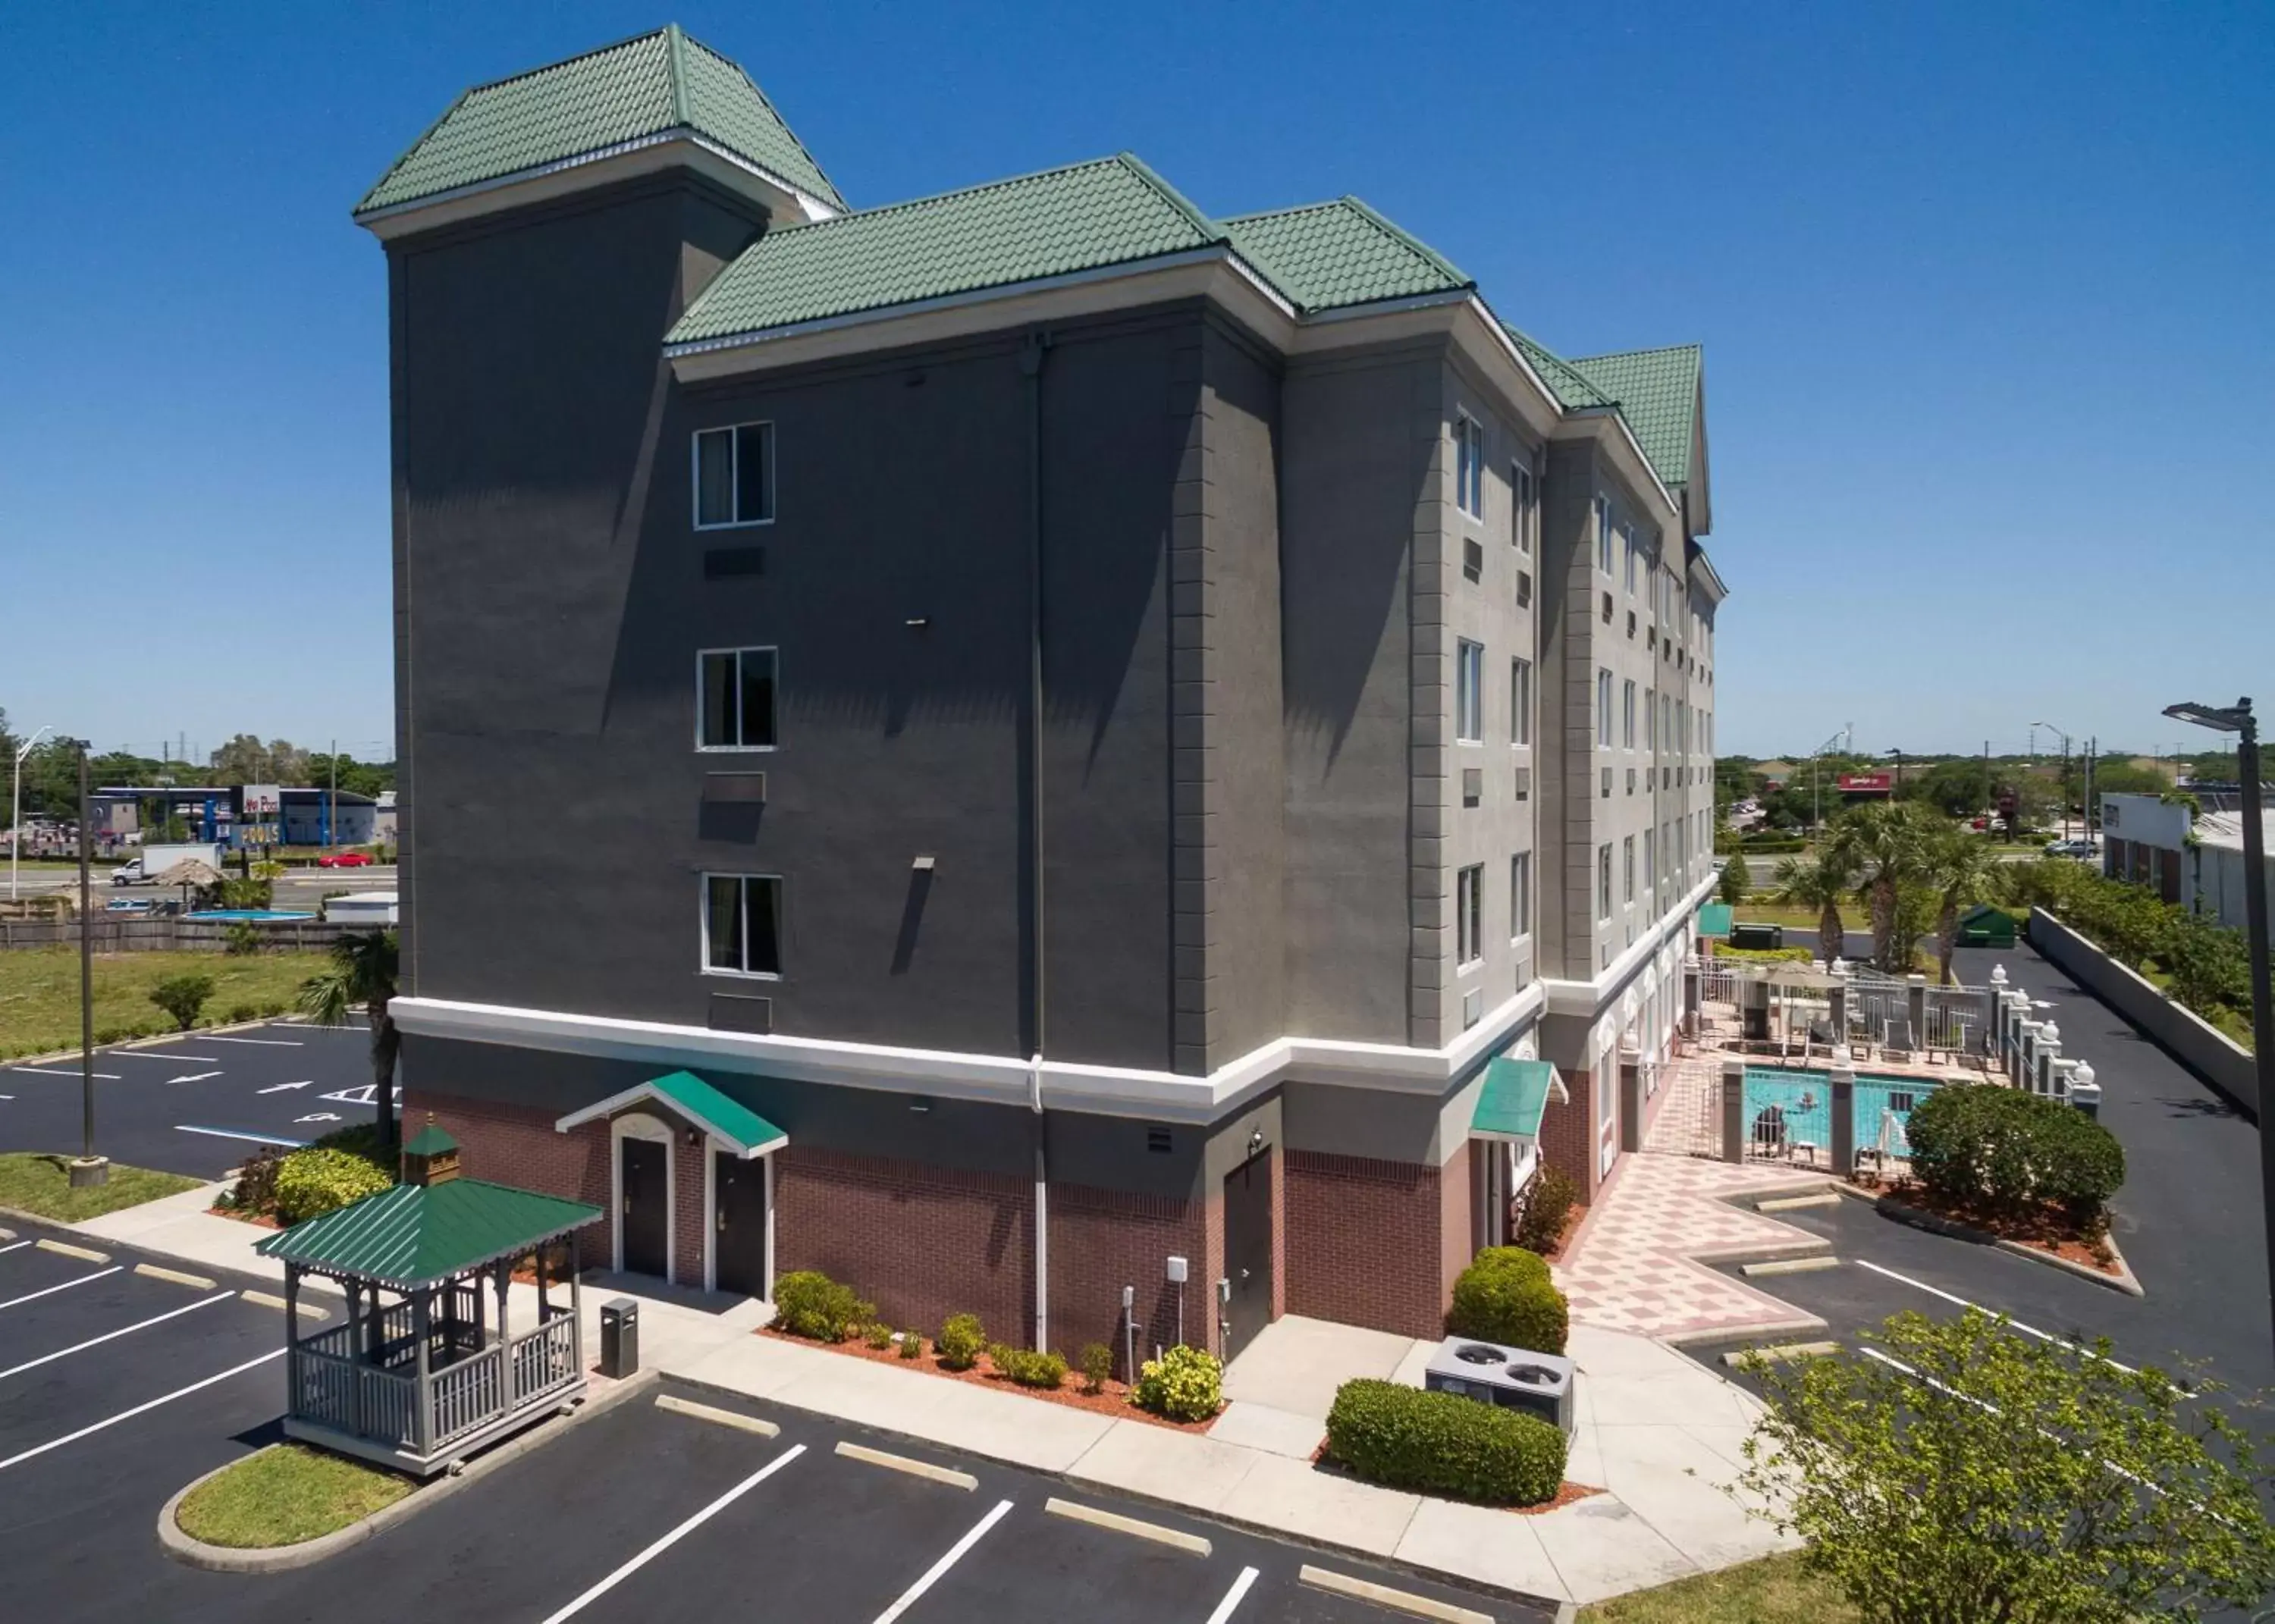 Property Building in Country Inn & Suites by Radisson, St. Petersburg - Clearwater, FL